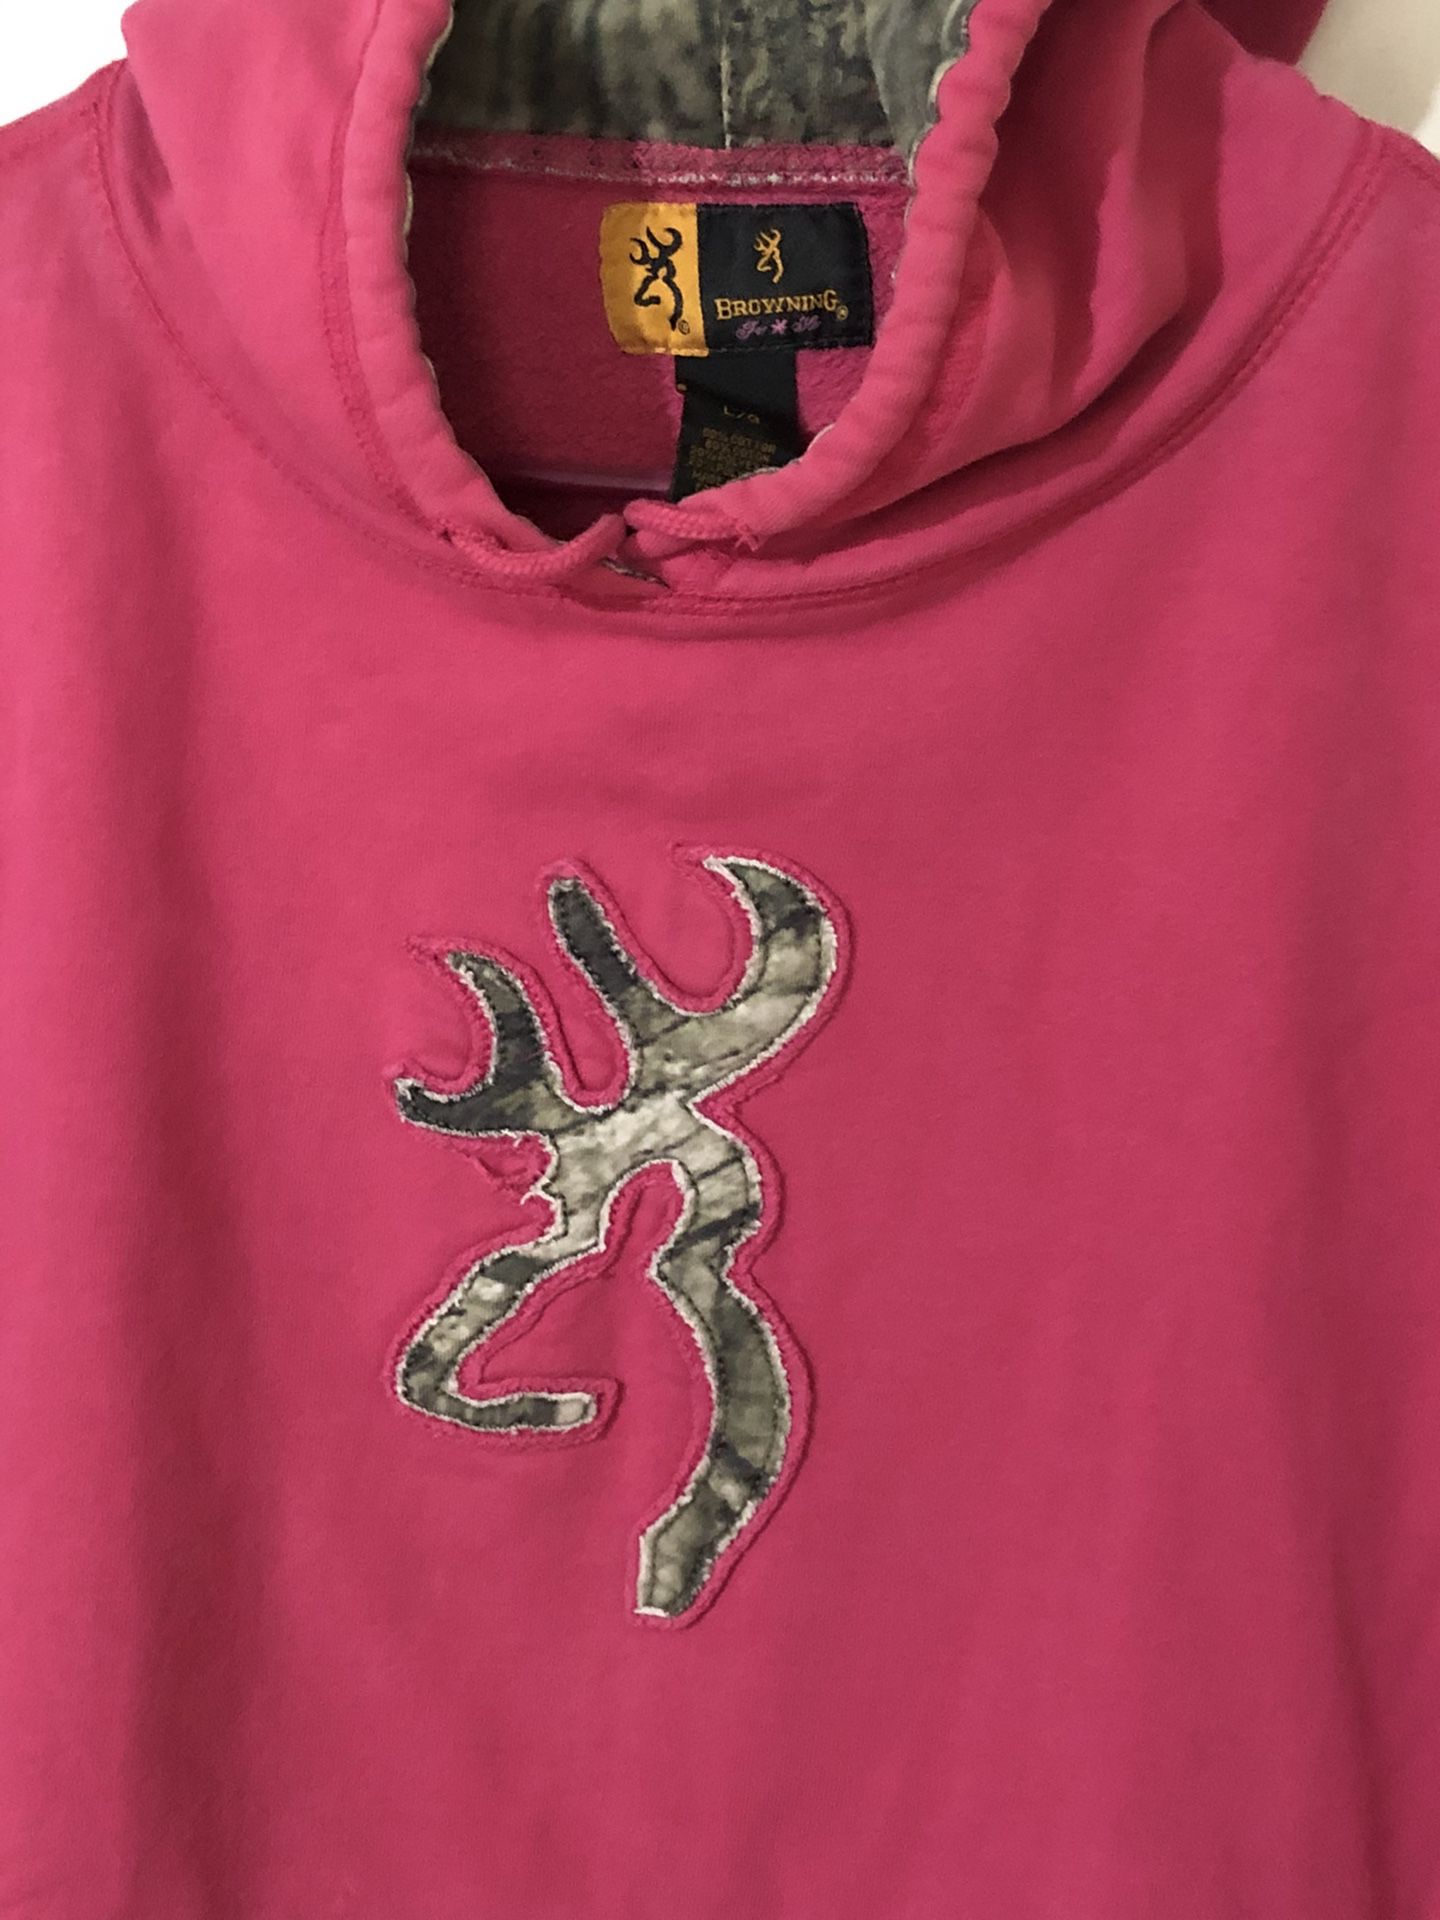 L Browning Hoodie Hot Pink/Camo